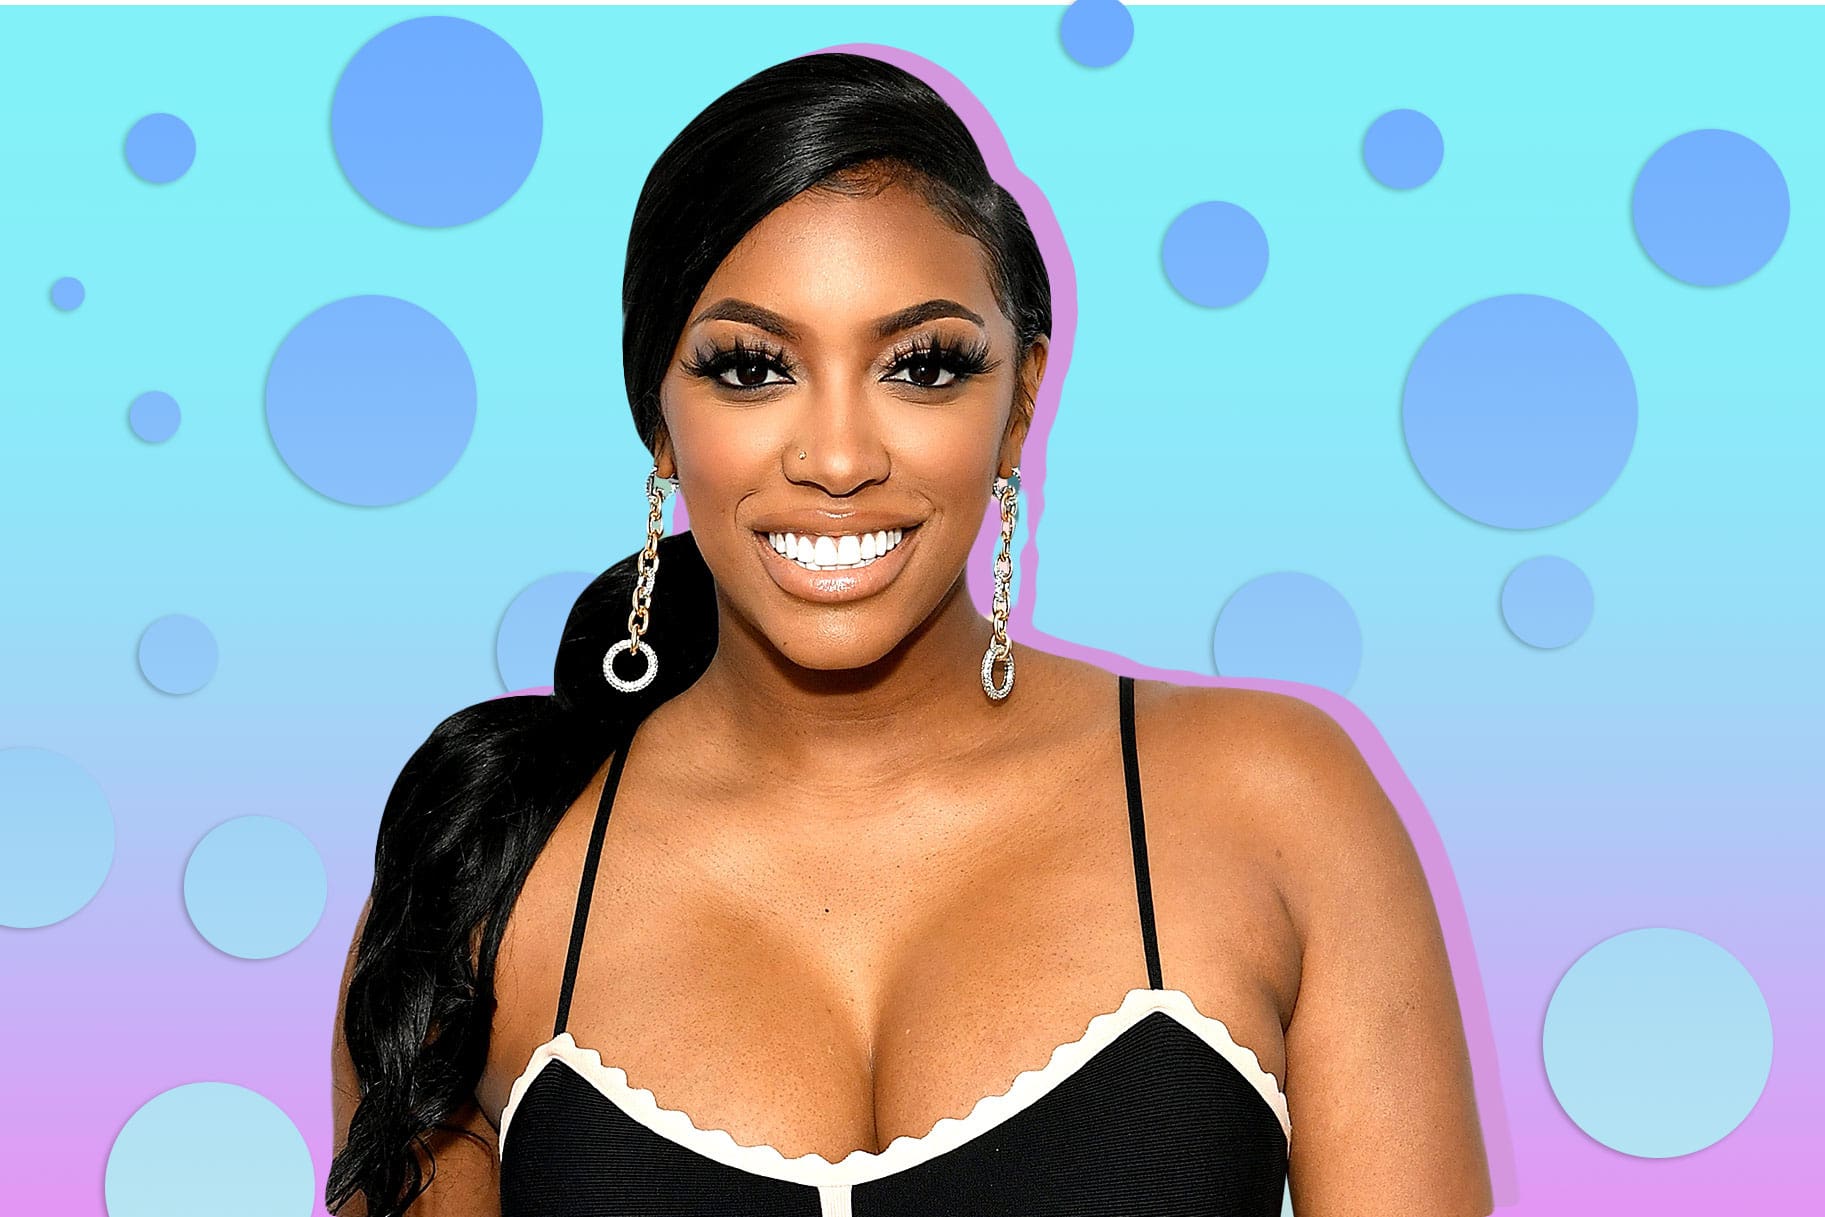 Porsha Williams' Daughter, Pilar Jhena Is Glowing In This Amazing Versace Outfit